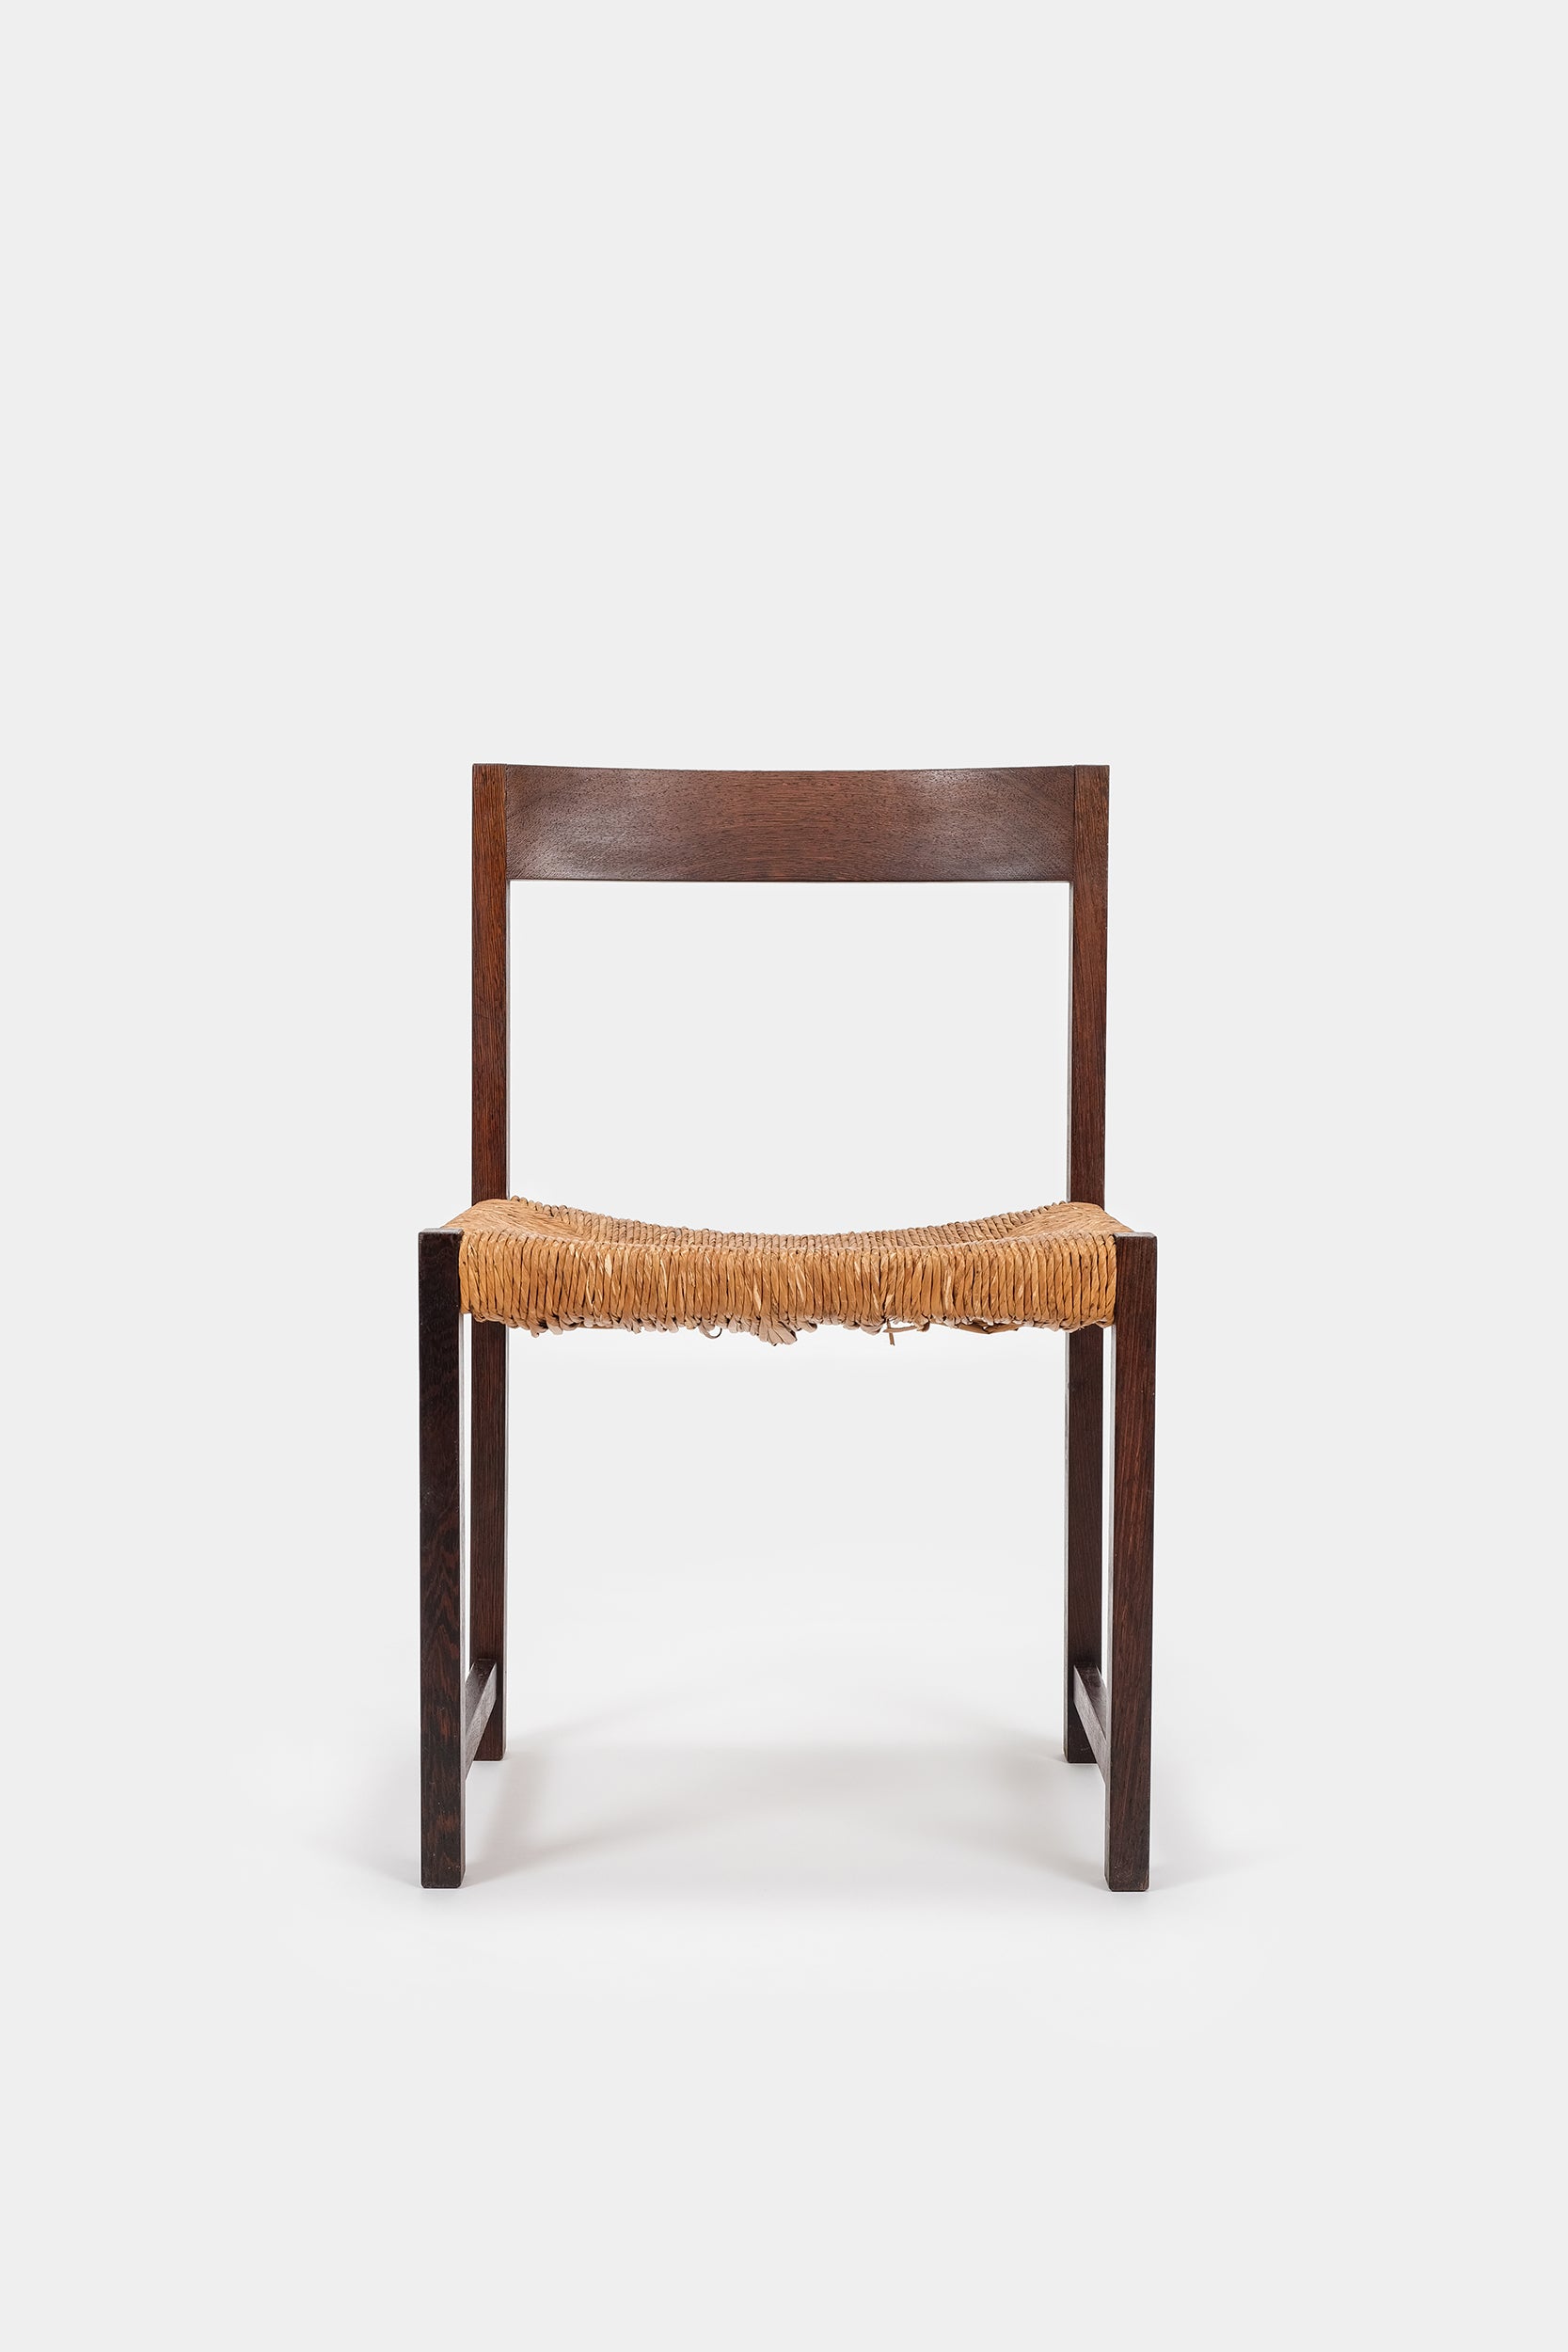 Chair, Wenge with Cord Covering, 70s